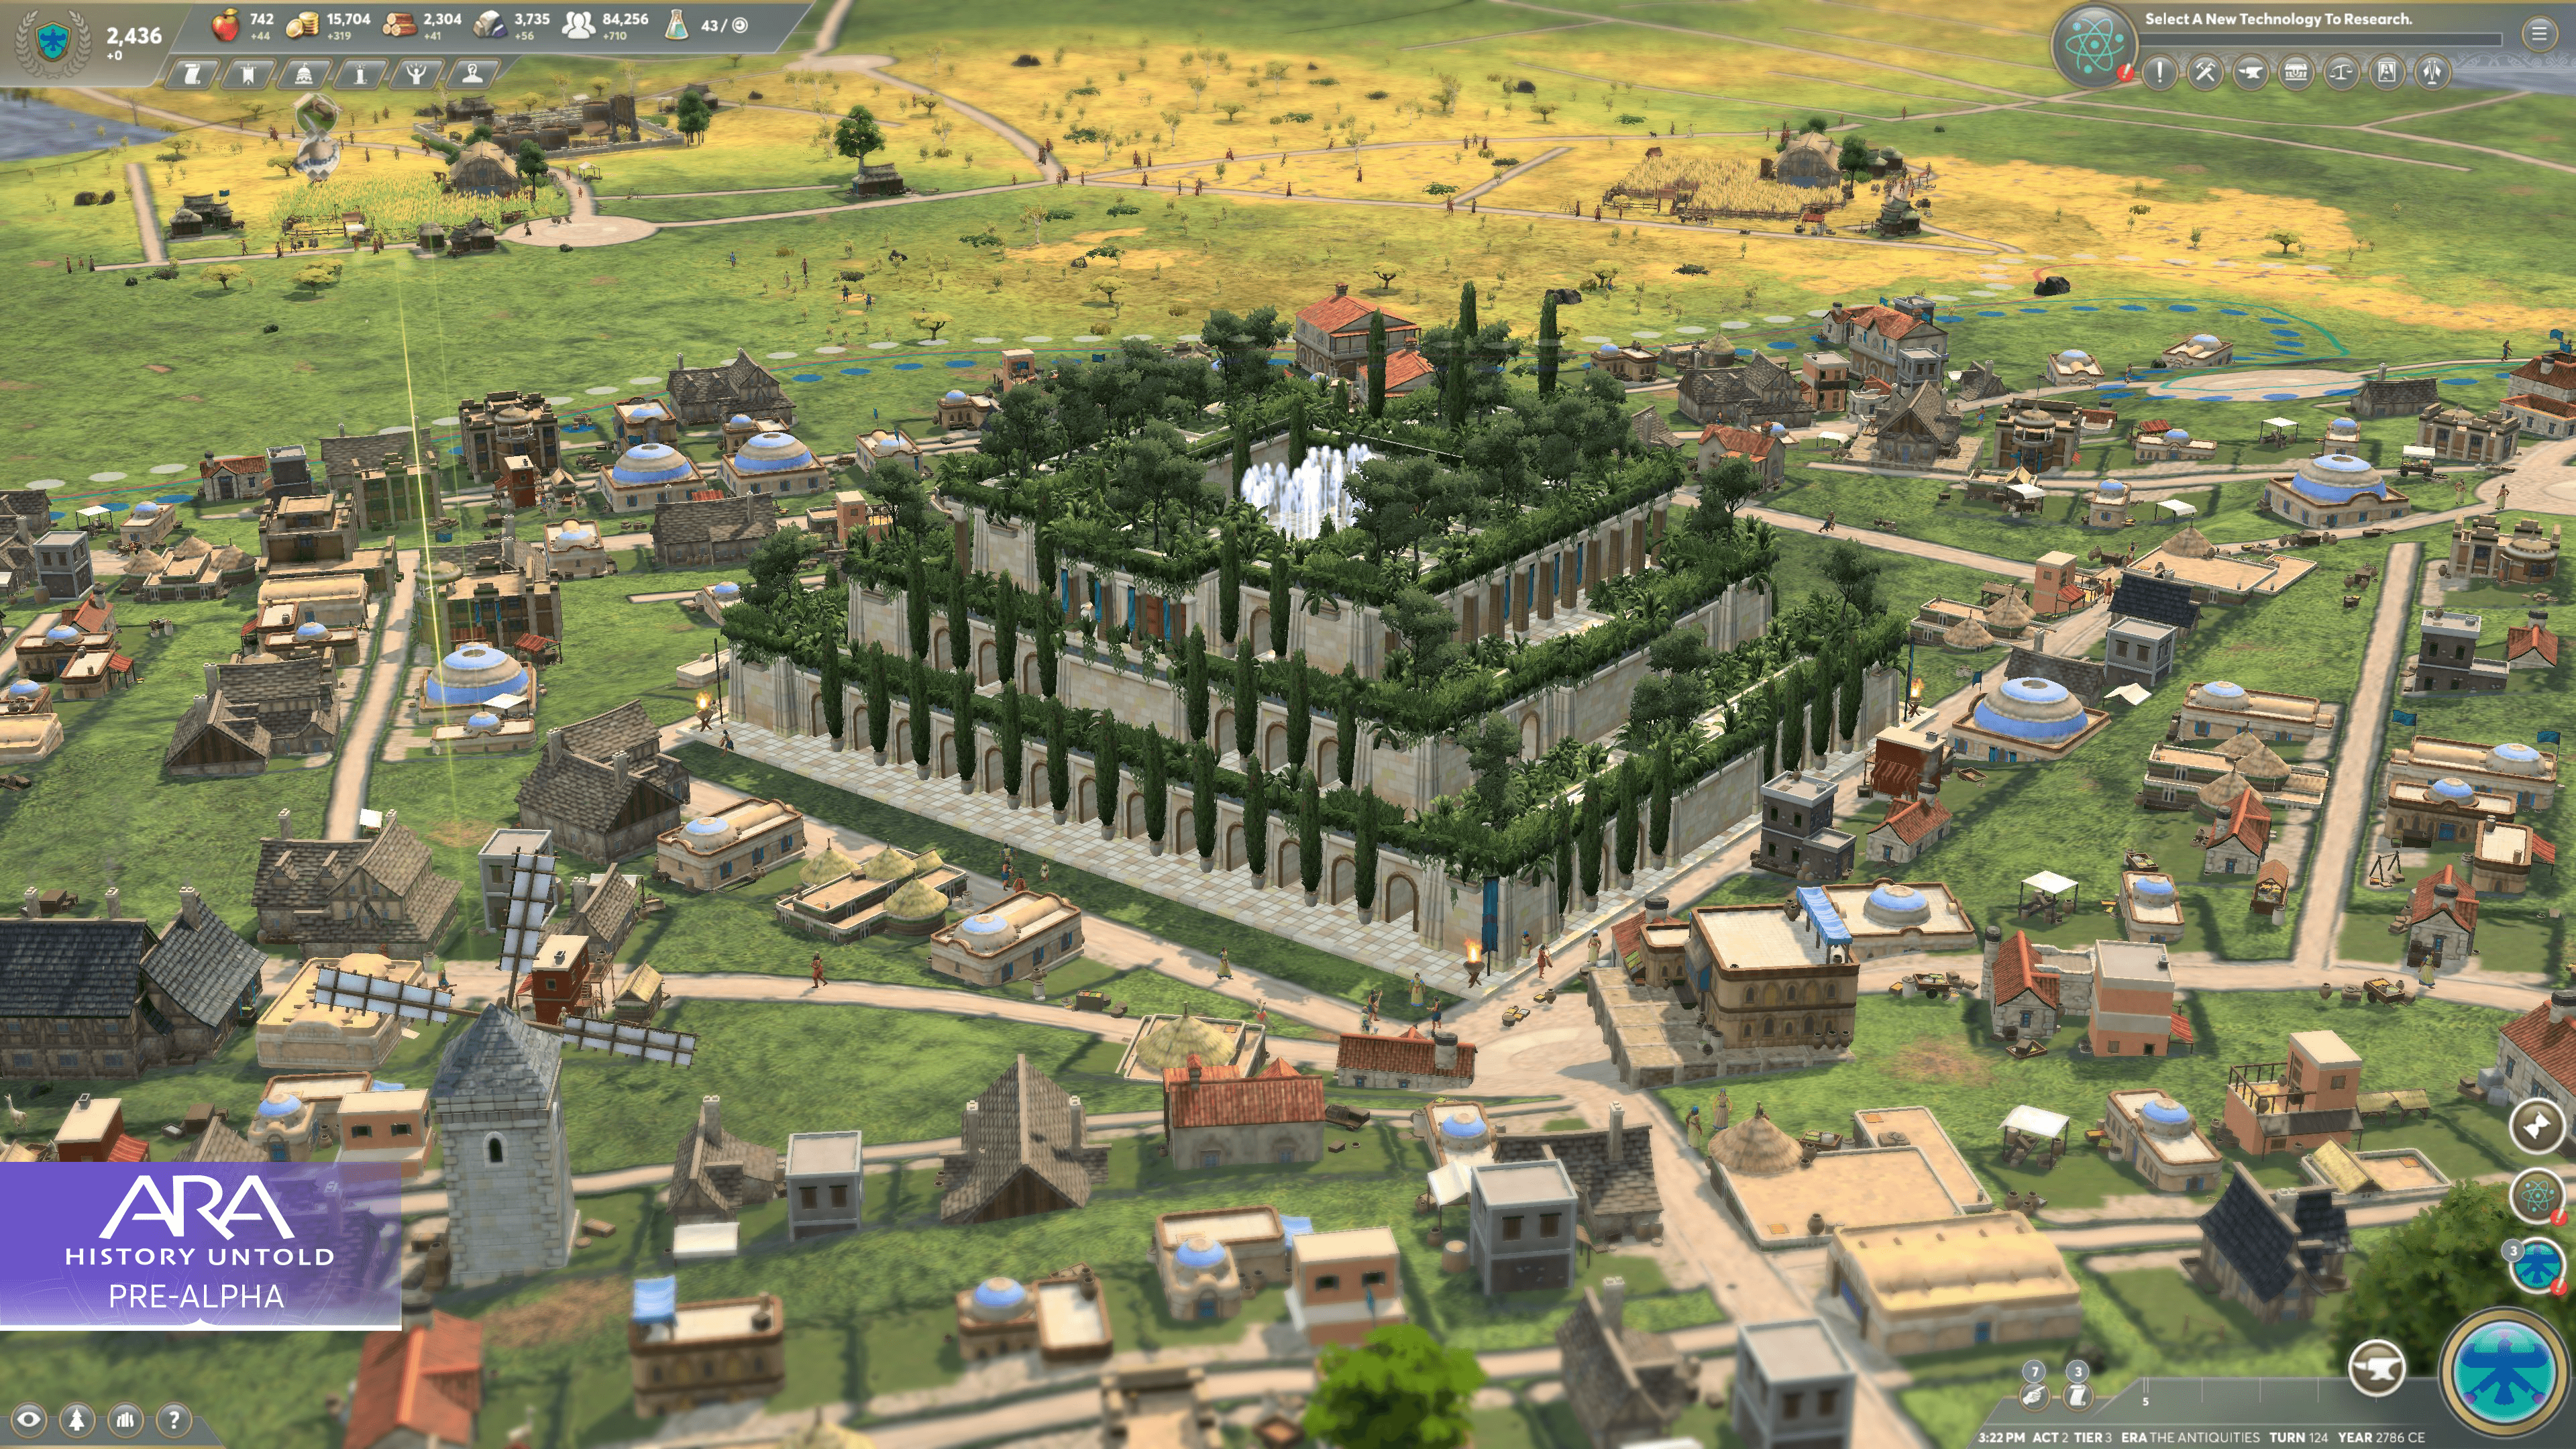 Screenshot of the Hanging Gardens of Nineveh Triumph from the Ara: History Untold Pre-Alpha